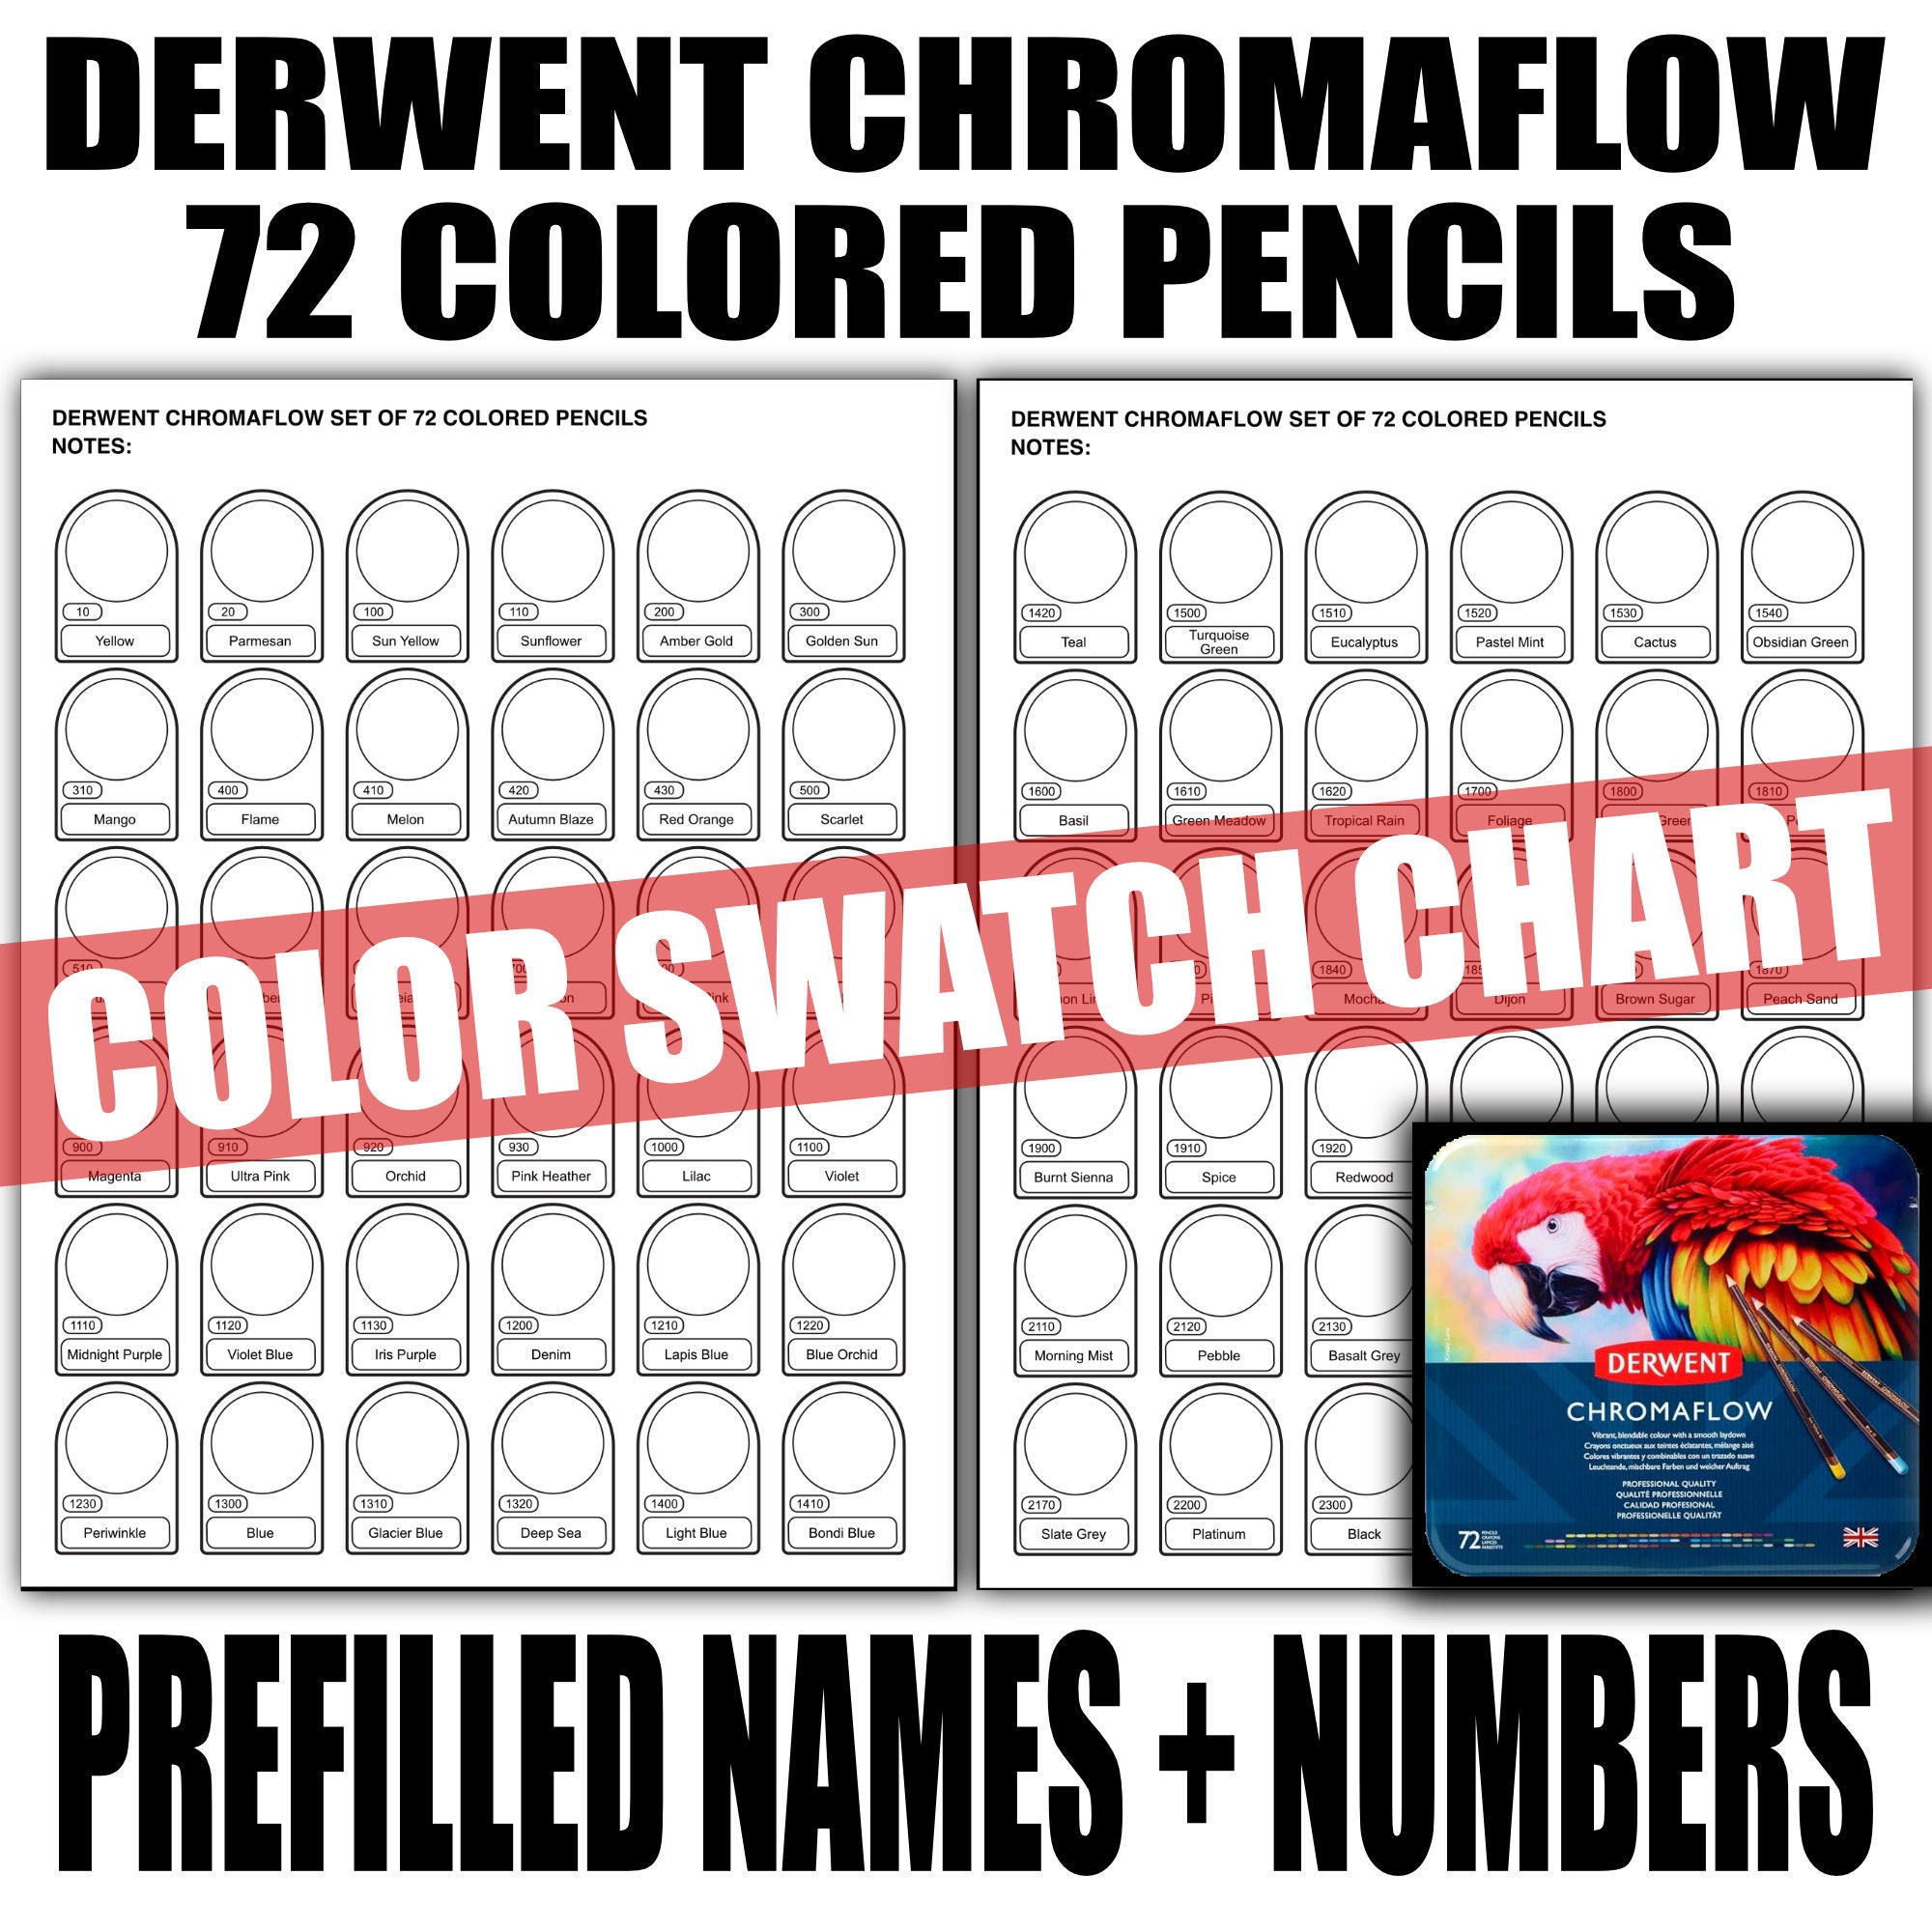 Crayola Colors of the World 150-count Swatch Sheet 